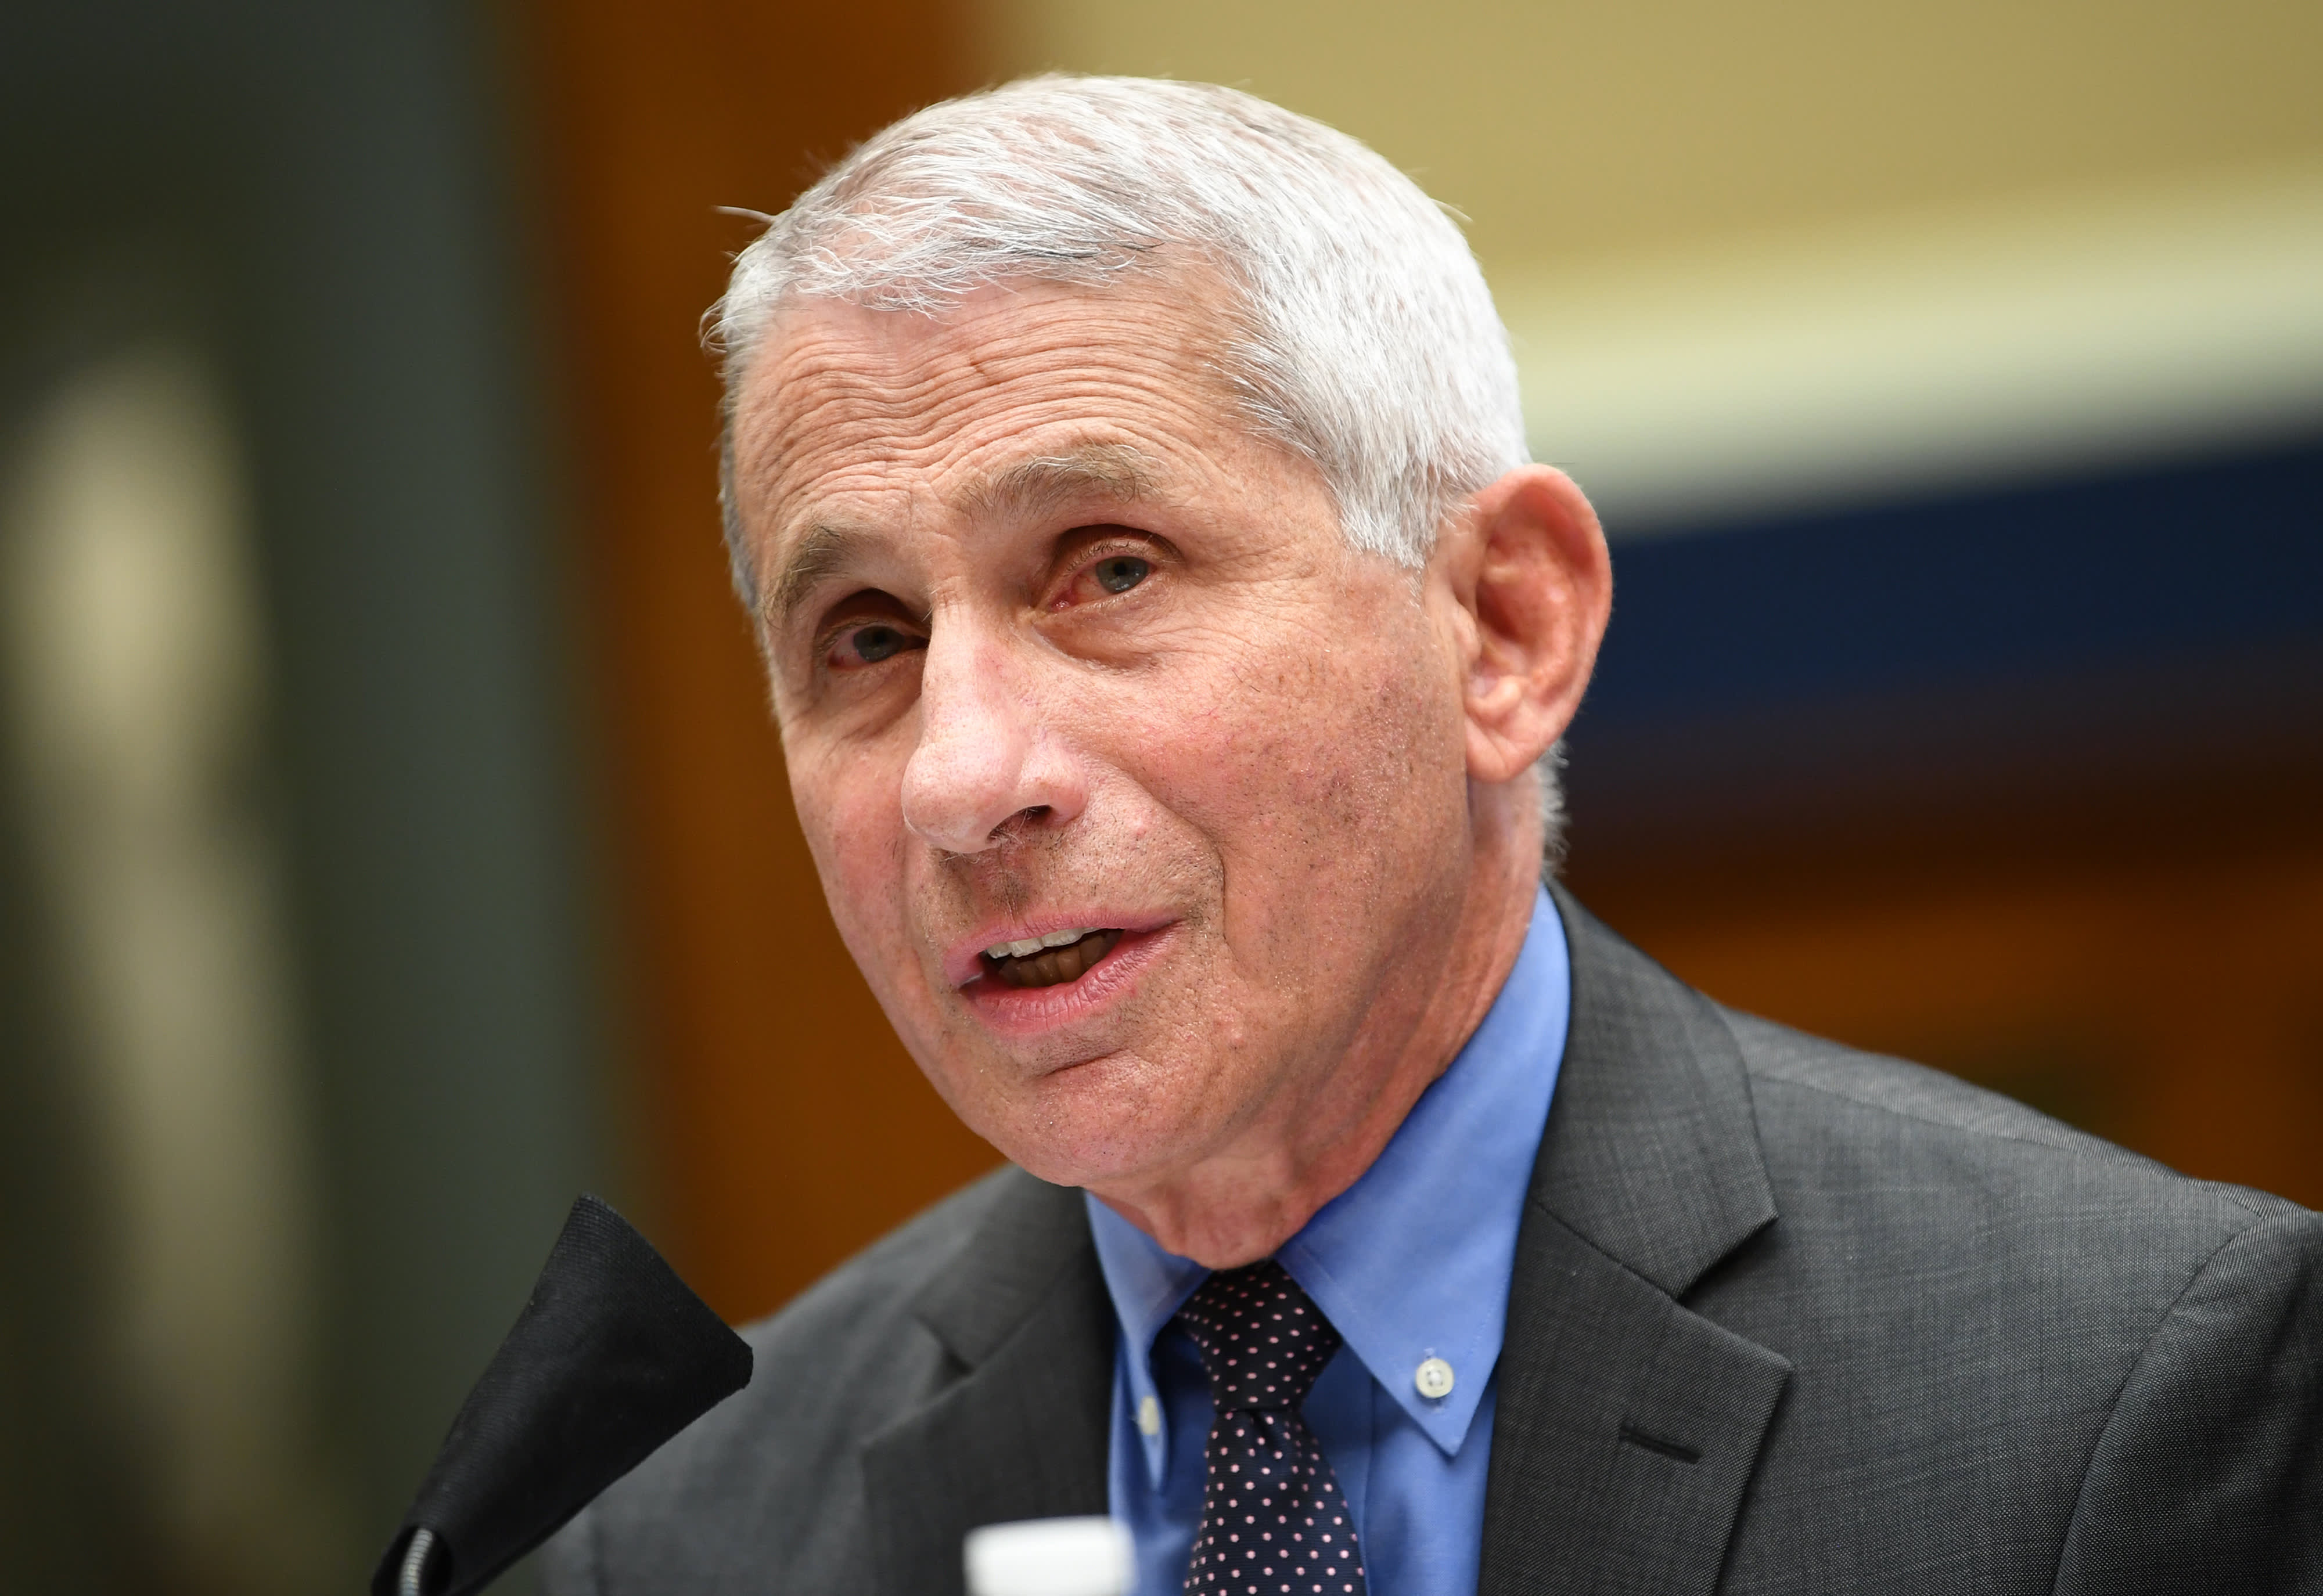 Dr. Anthony Fauci says chance of coronavirus vaccine being highly effective is 'not great'